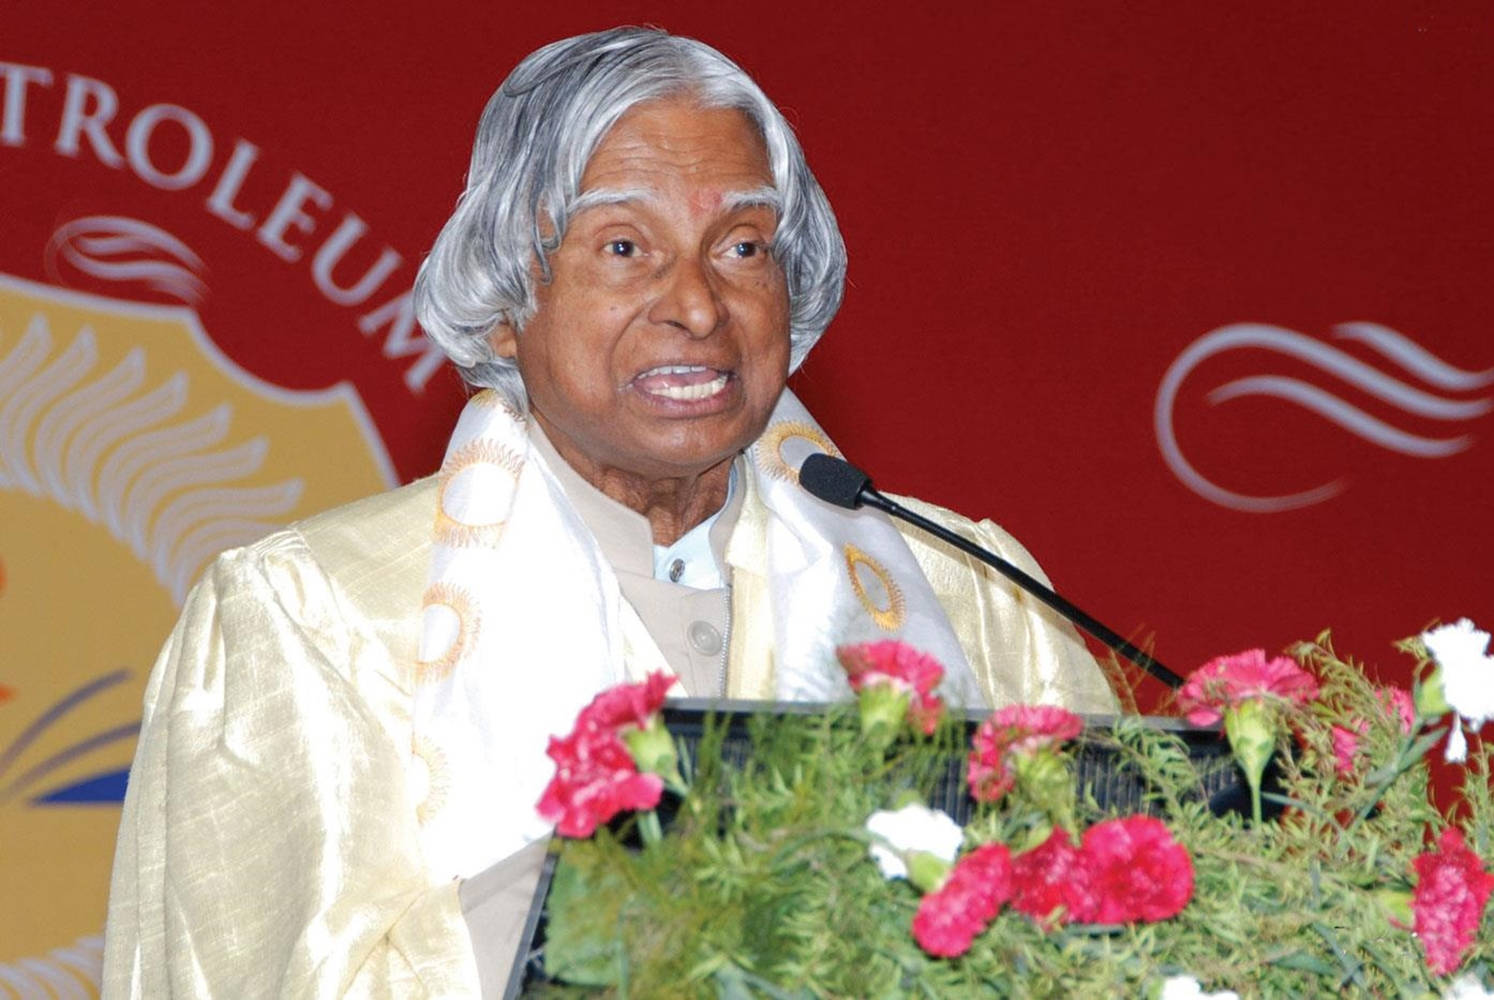 Former Indian President Dr. A.P.J Abdul Kalam delivering a powerful speech. Wallpaper